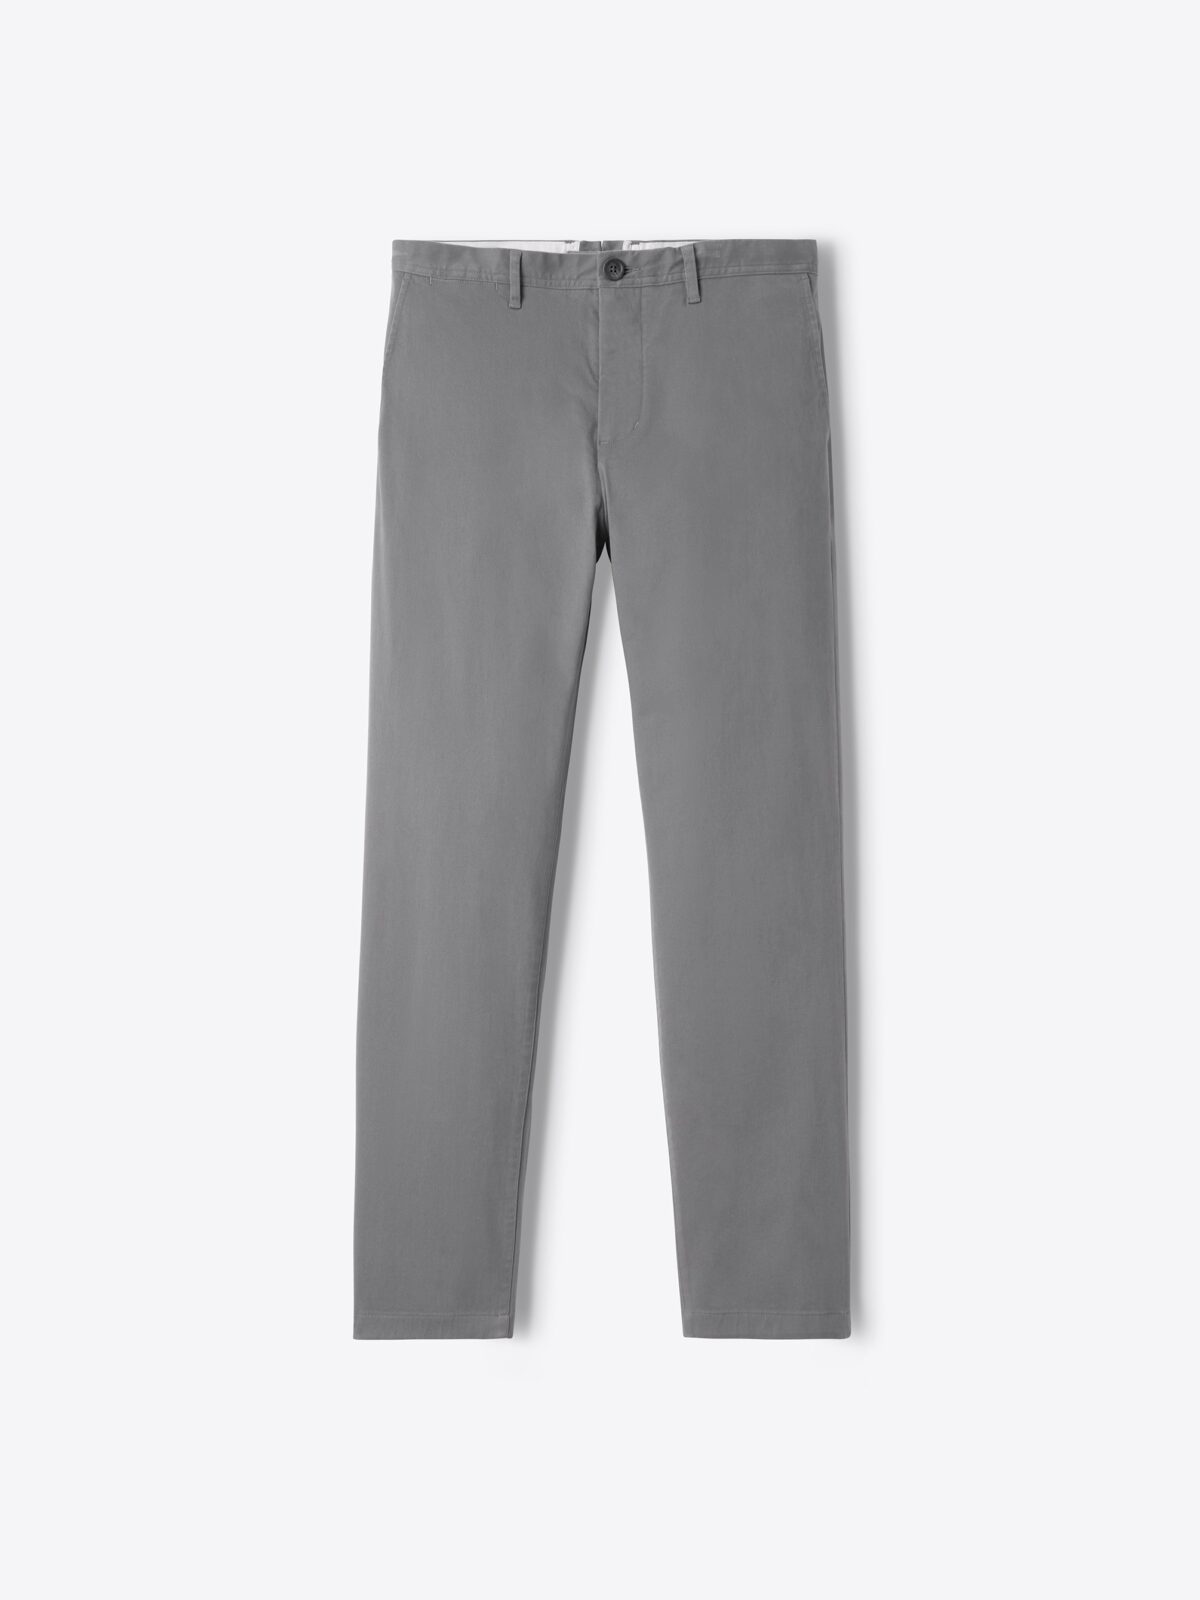 Modena Grey Peached Stretch Cotton Chino - Custom Fit Pants